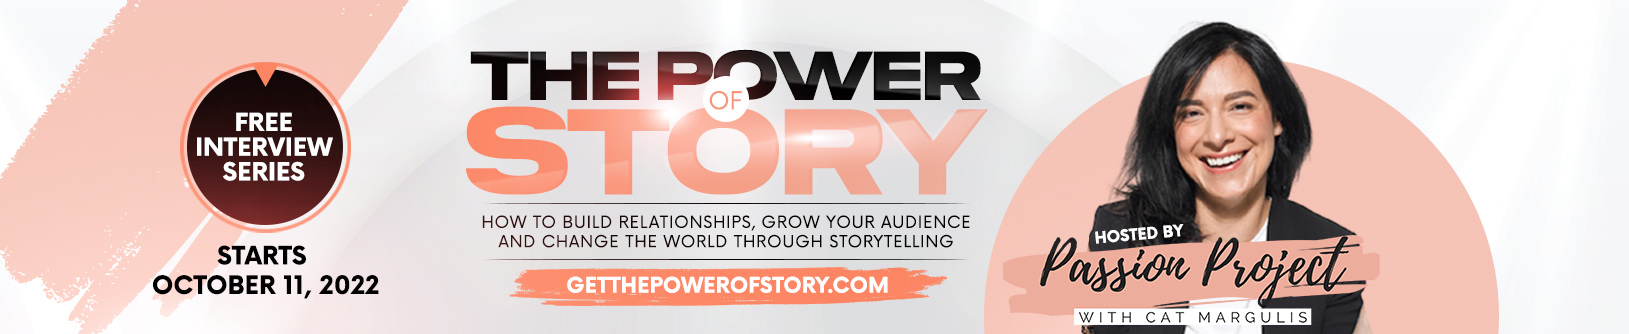 The Power of Story: How to build relationships, grow your audience  and change the world through storytelling